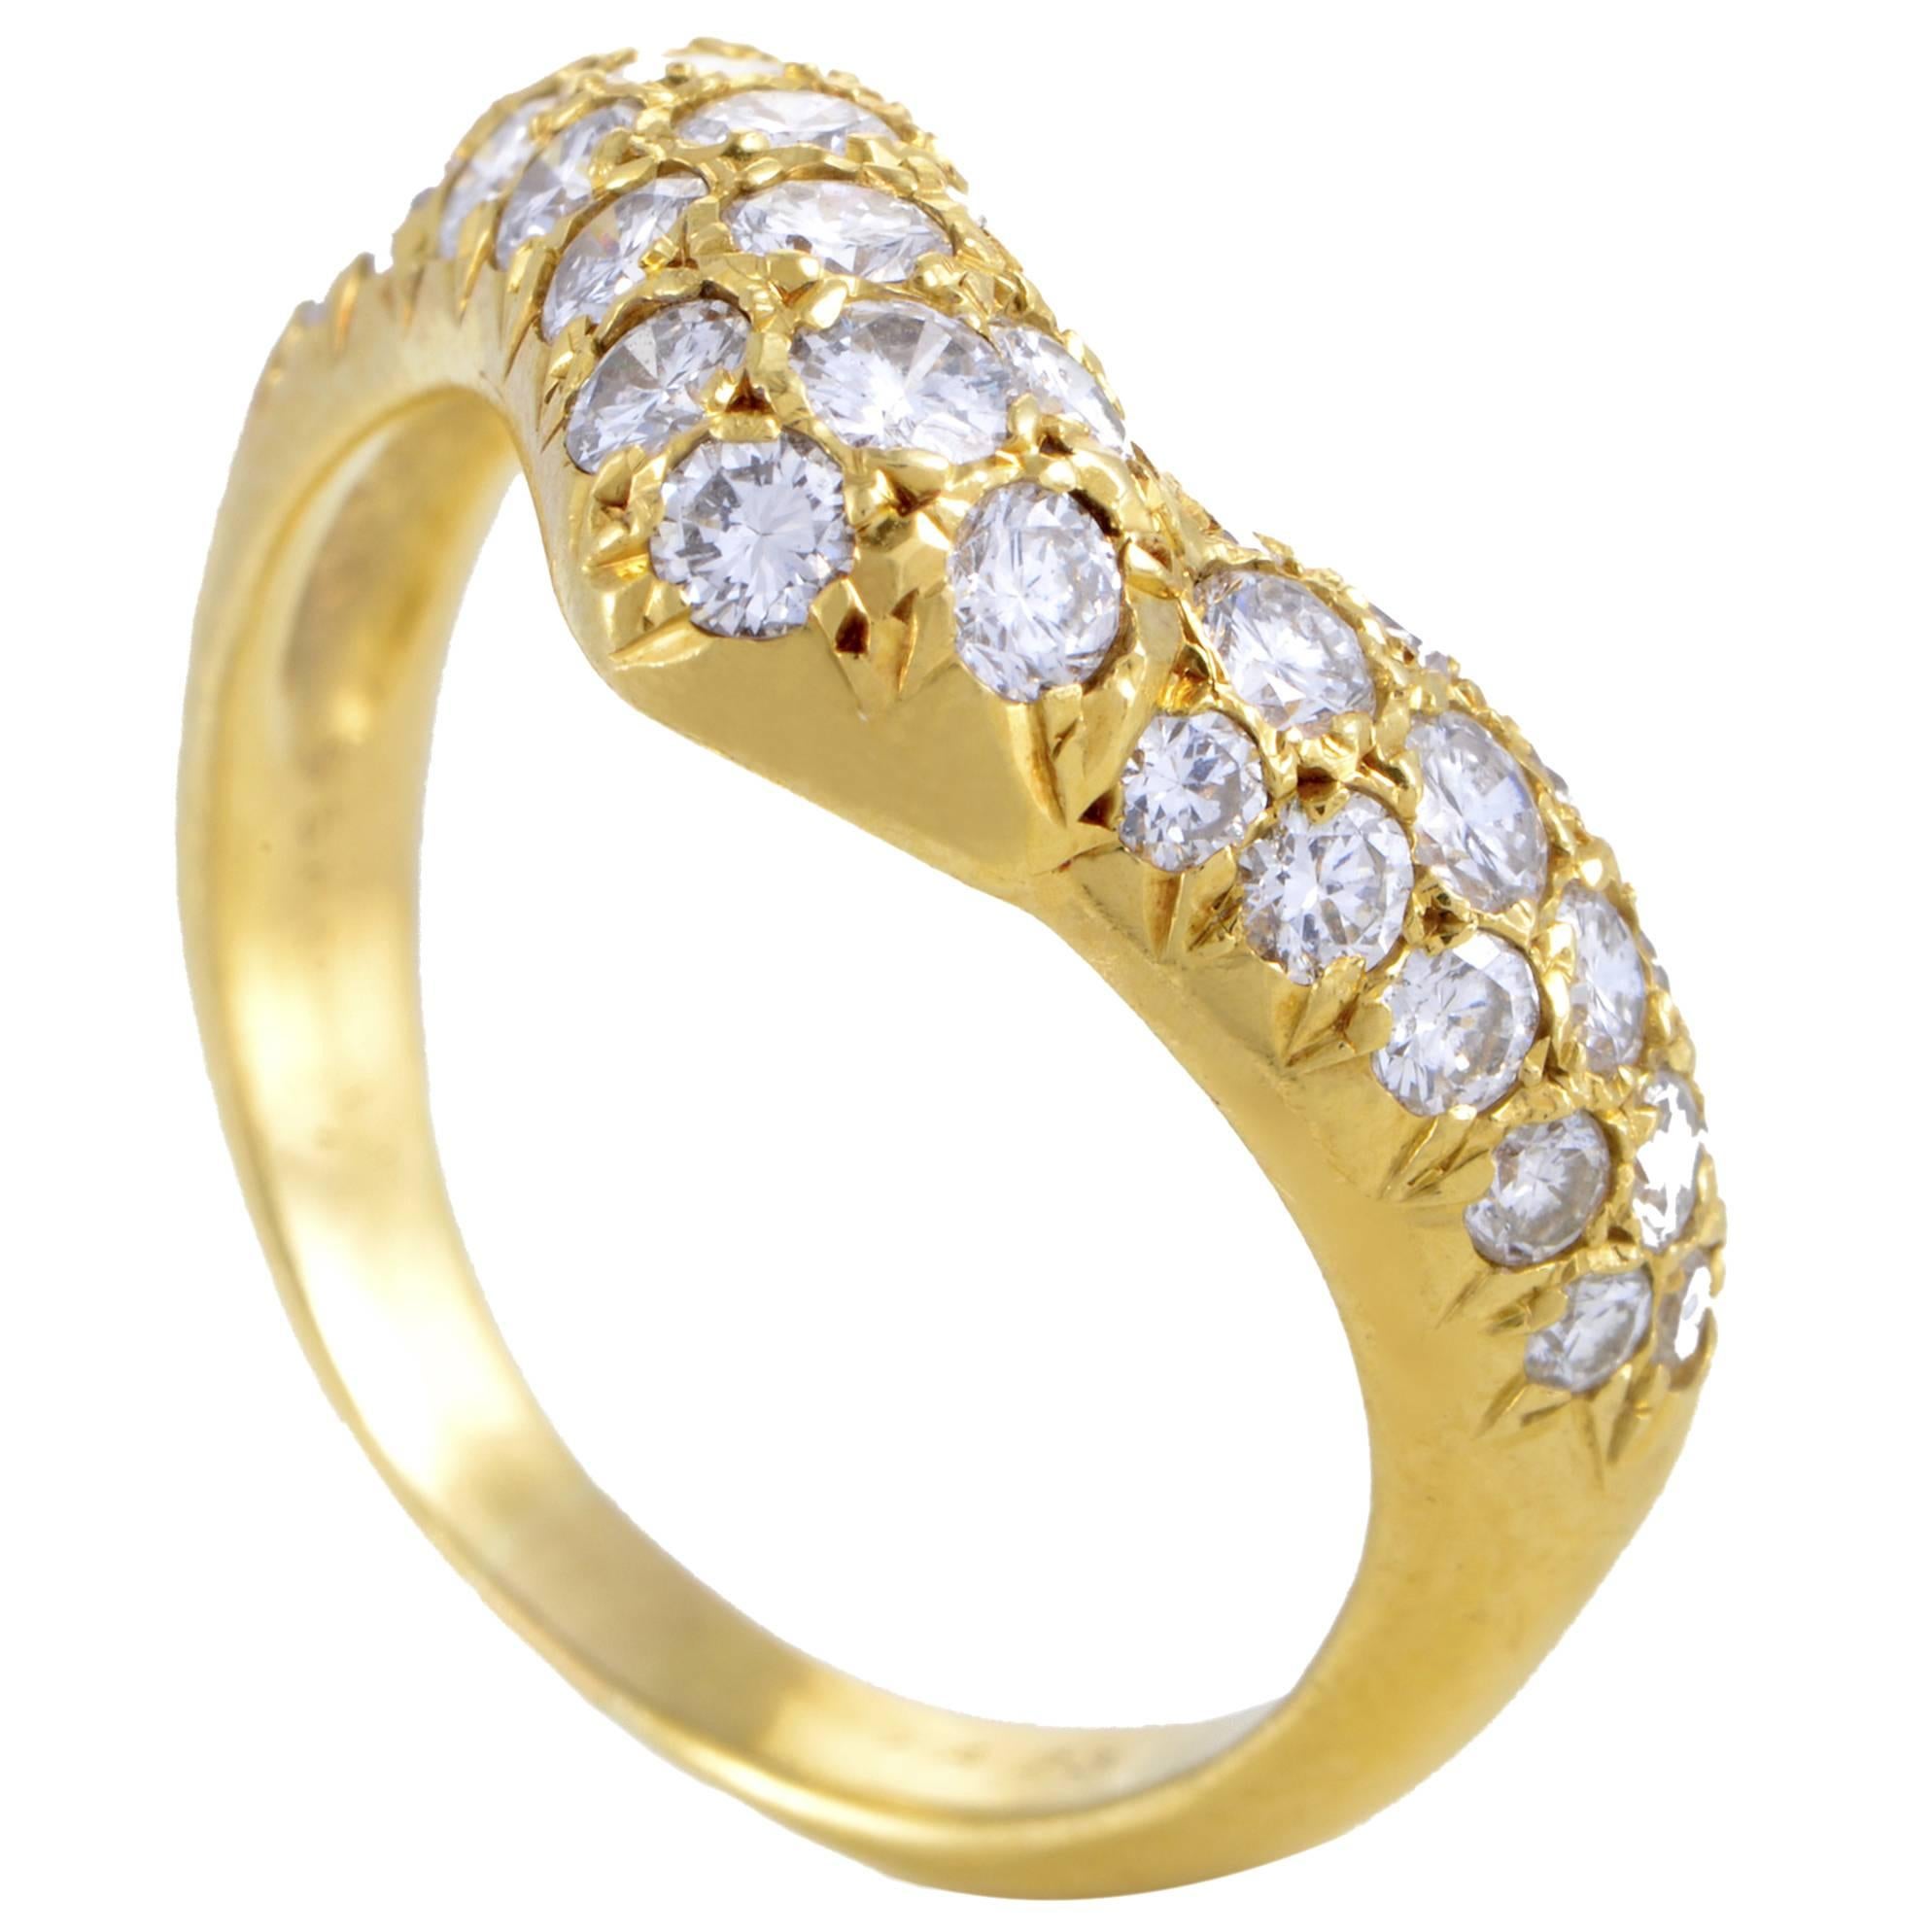 Van Cleef & Arpels 18K Yellow Gold Curved Diamond Band Ring size 6